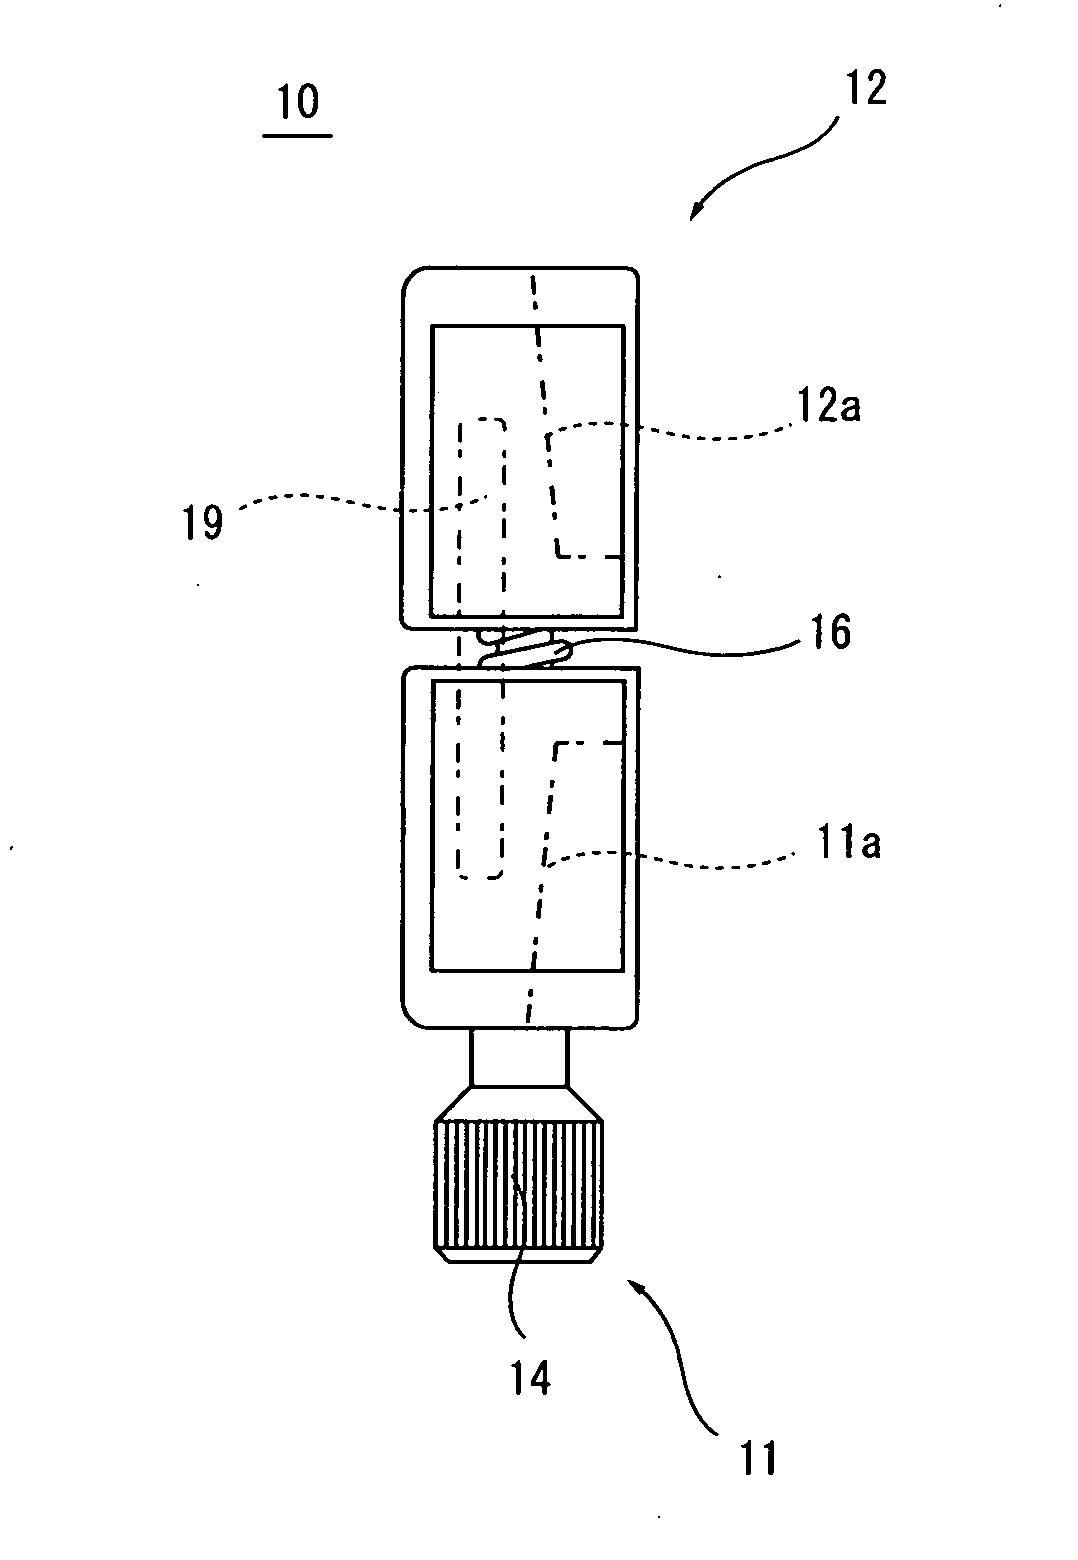 Sound deadening tool and sound deadening musical performance tool